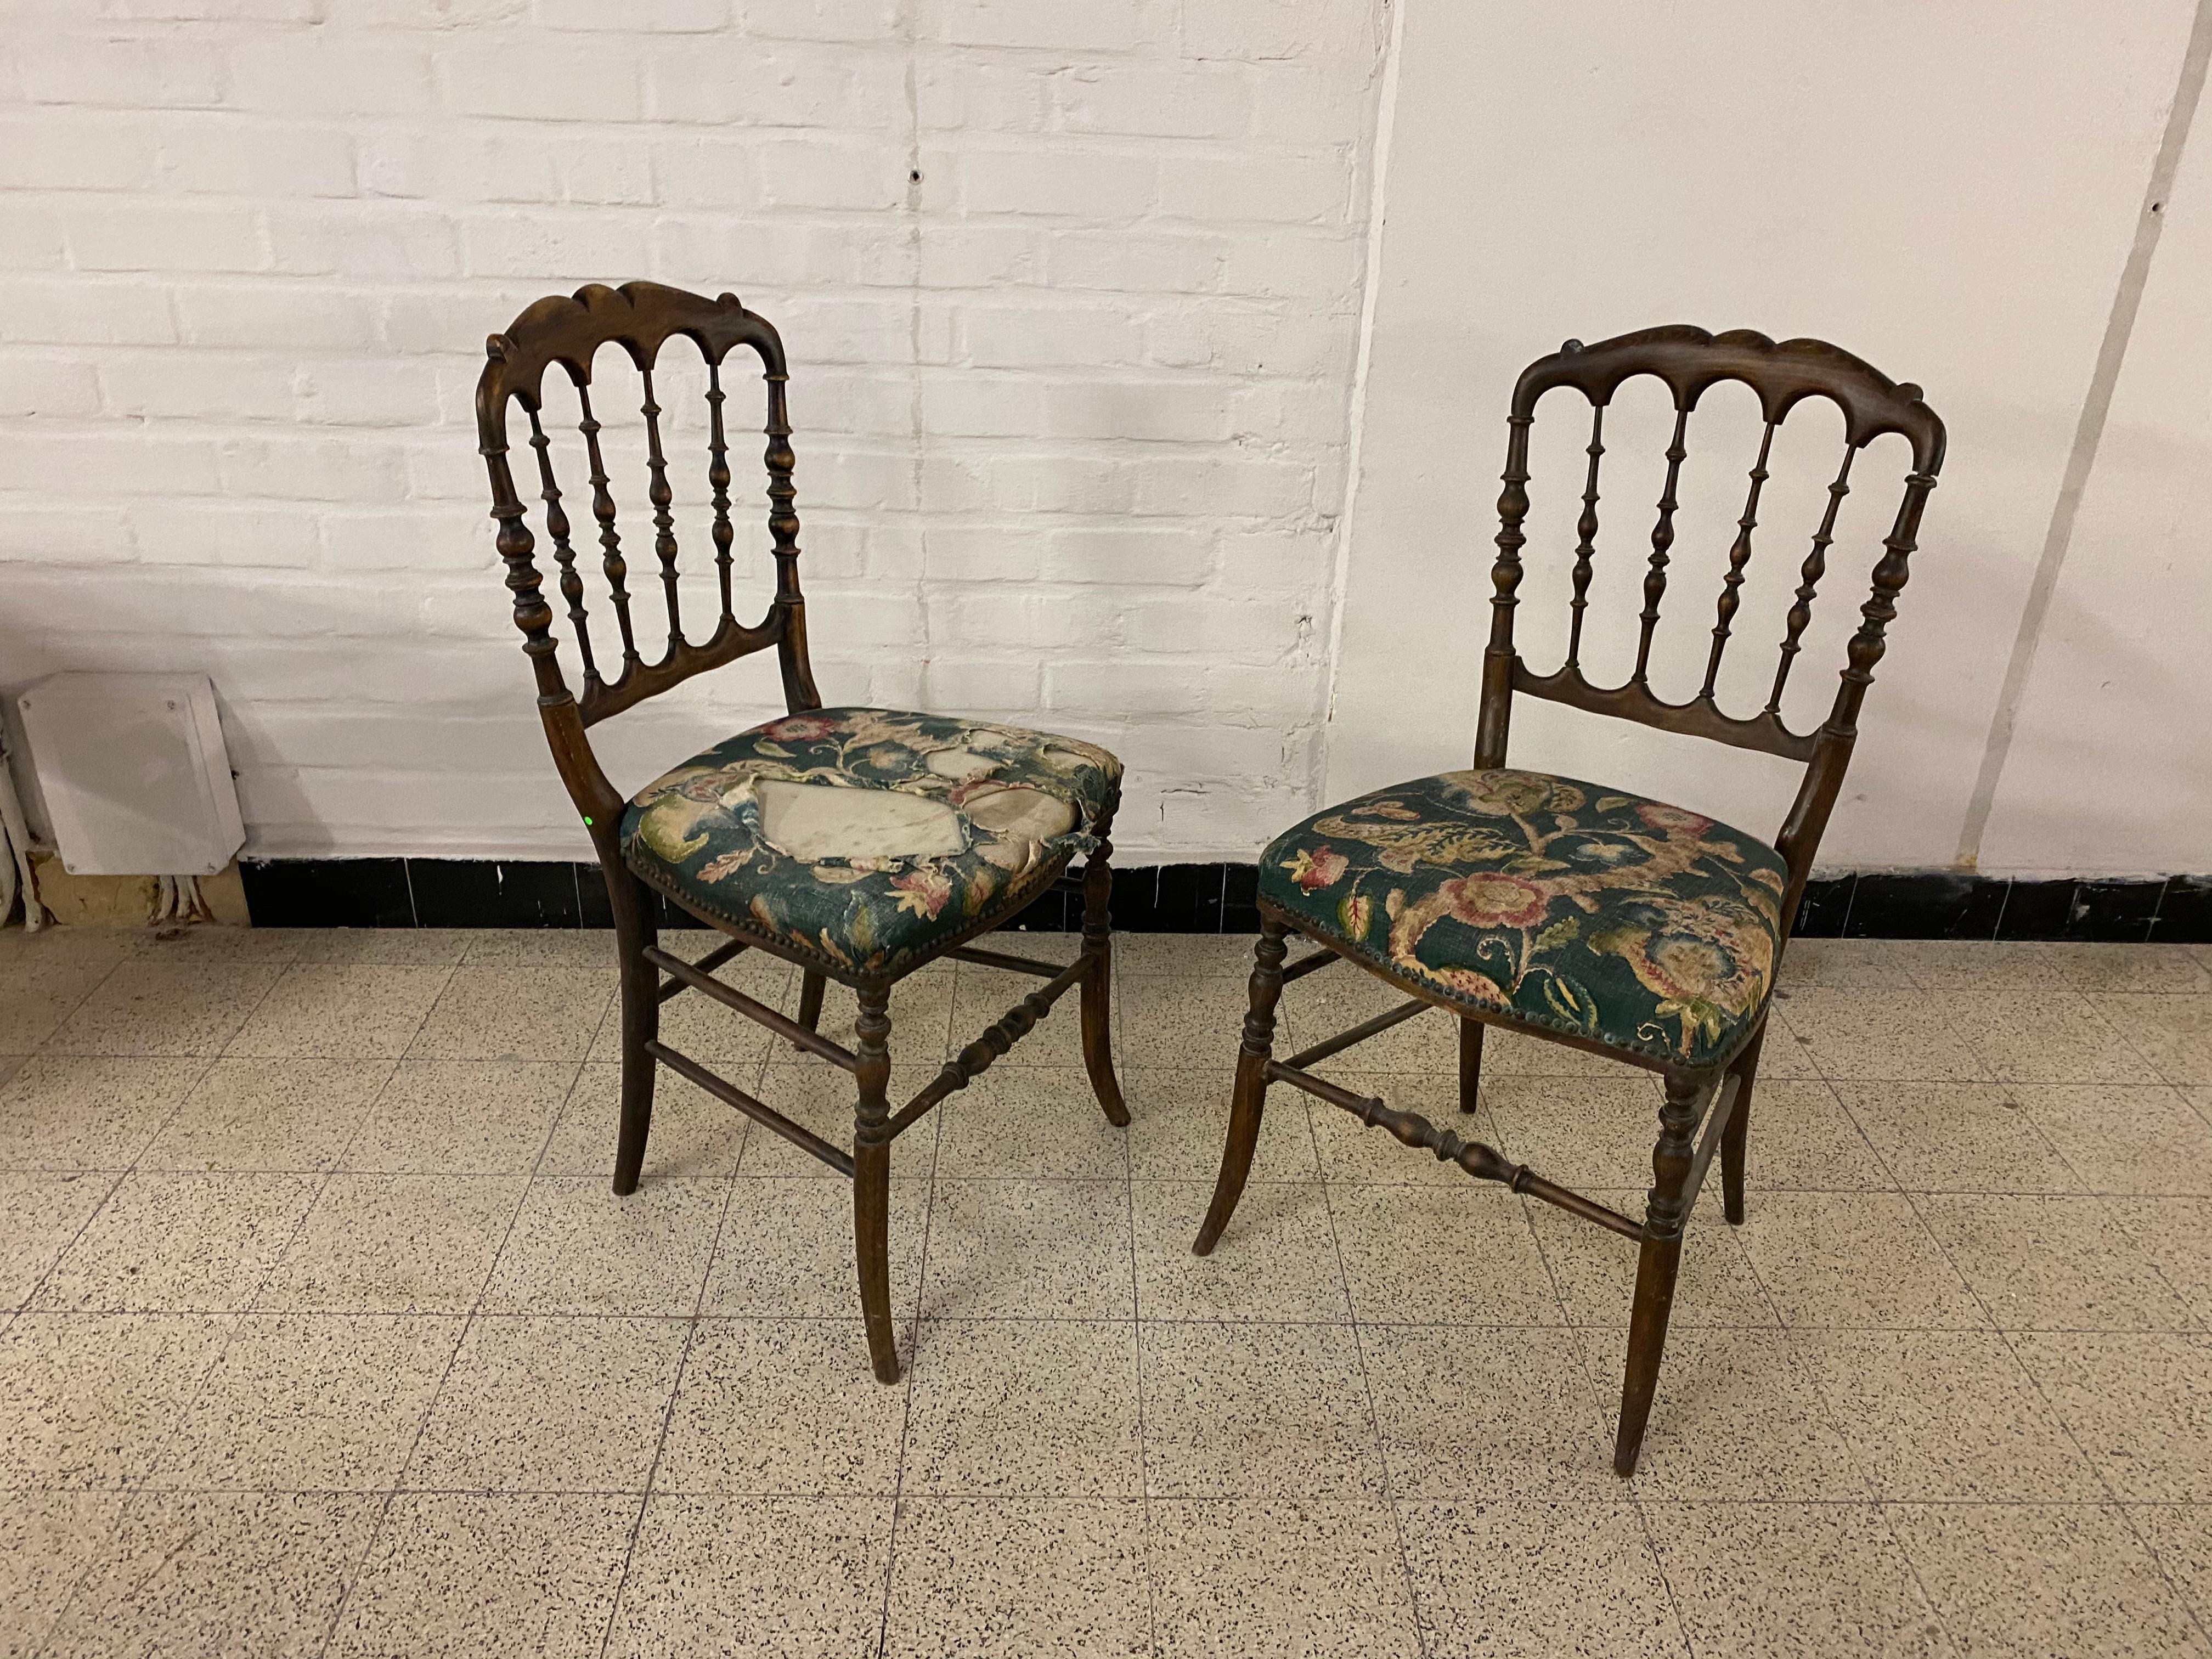 2 original Napoleon III ebonized chairs, France, 1850s
wear and lack of gilding.